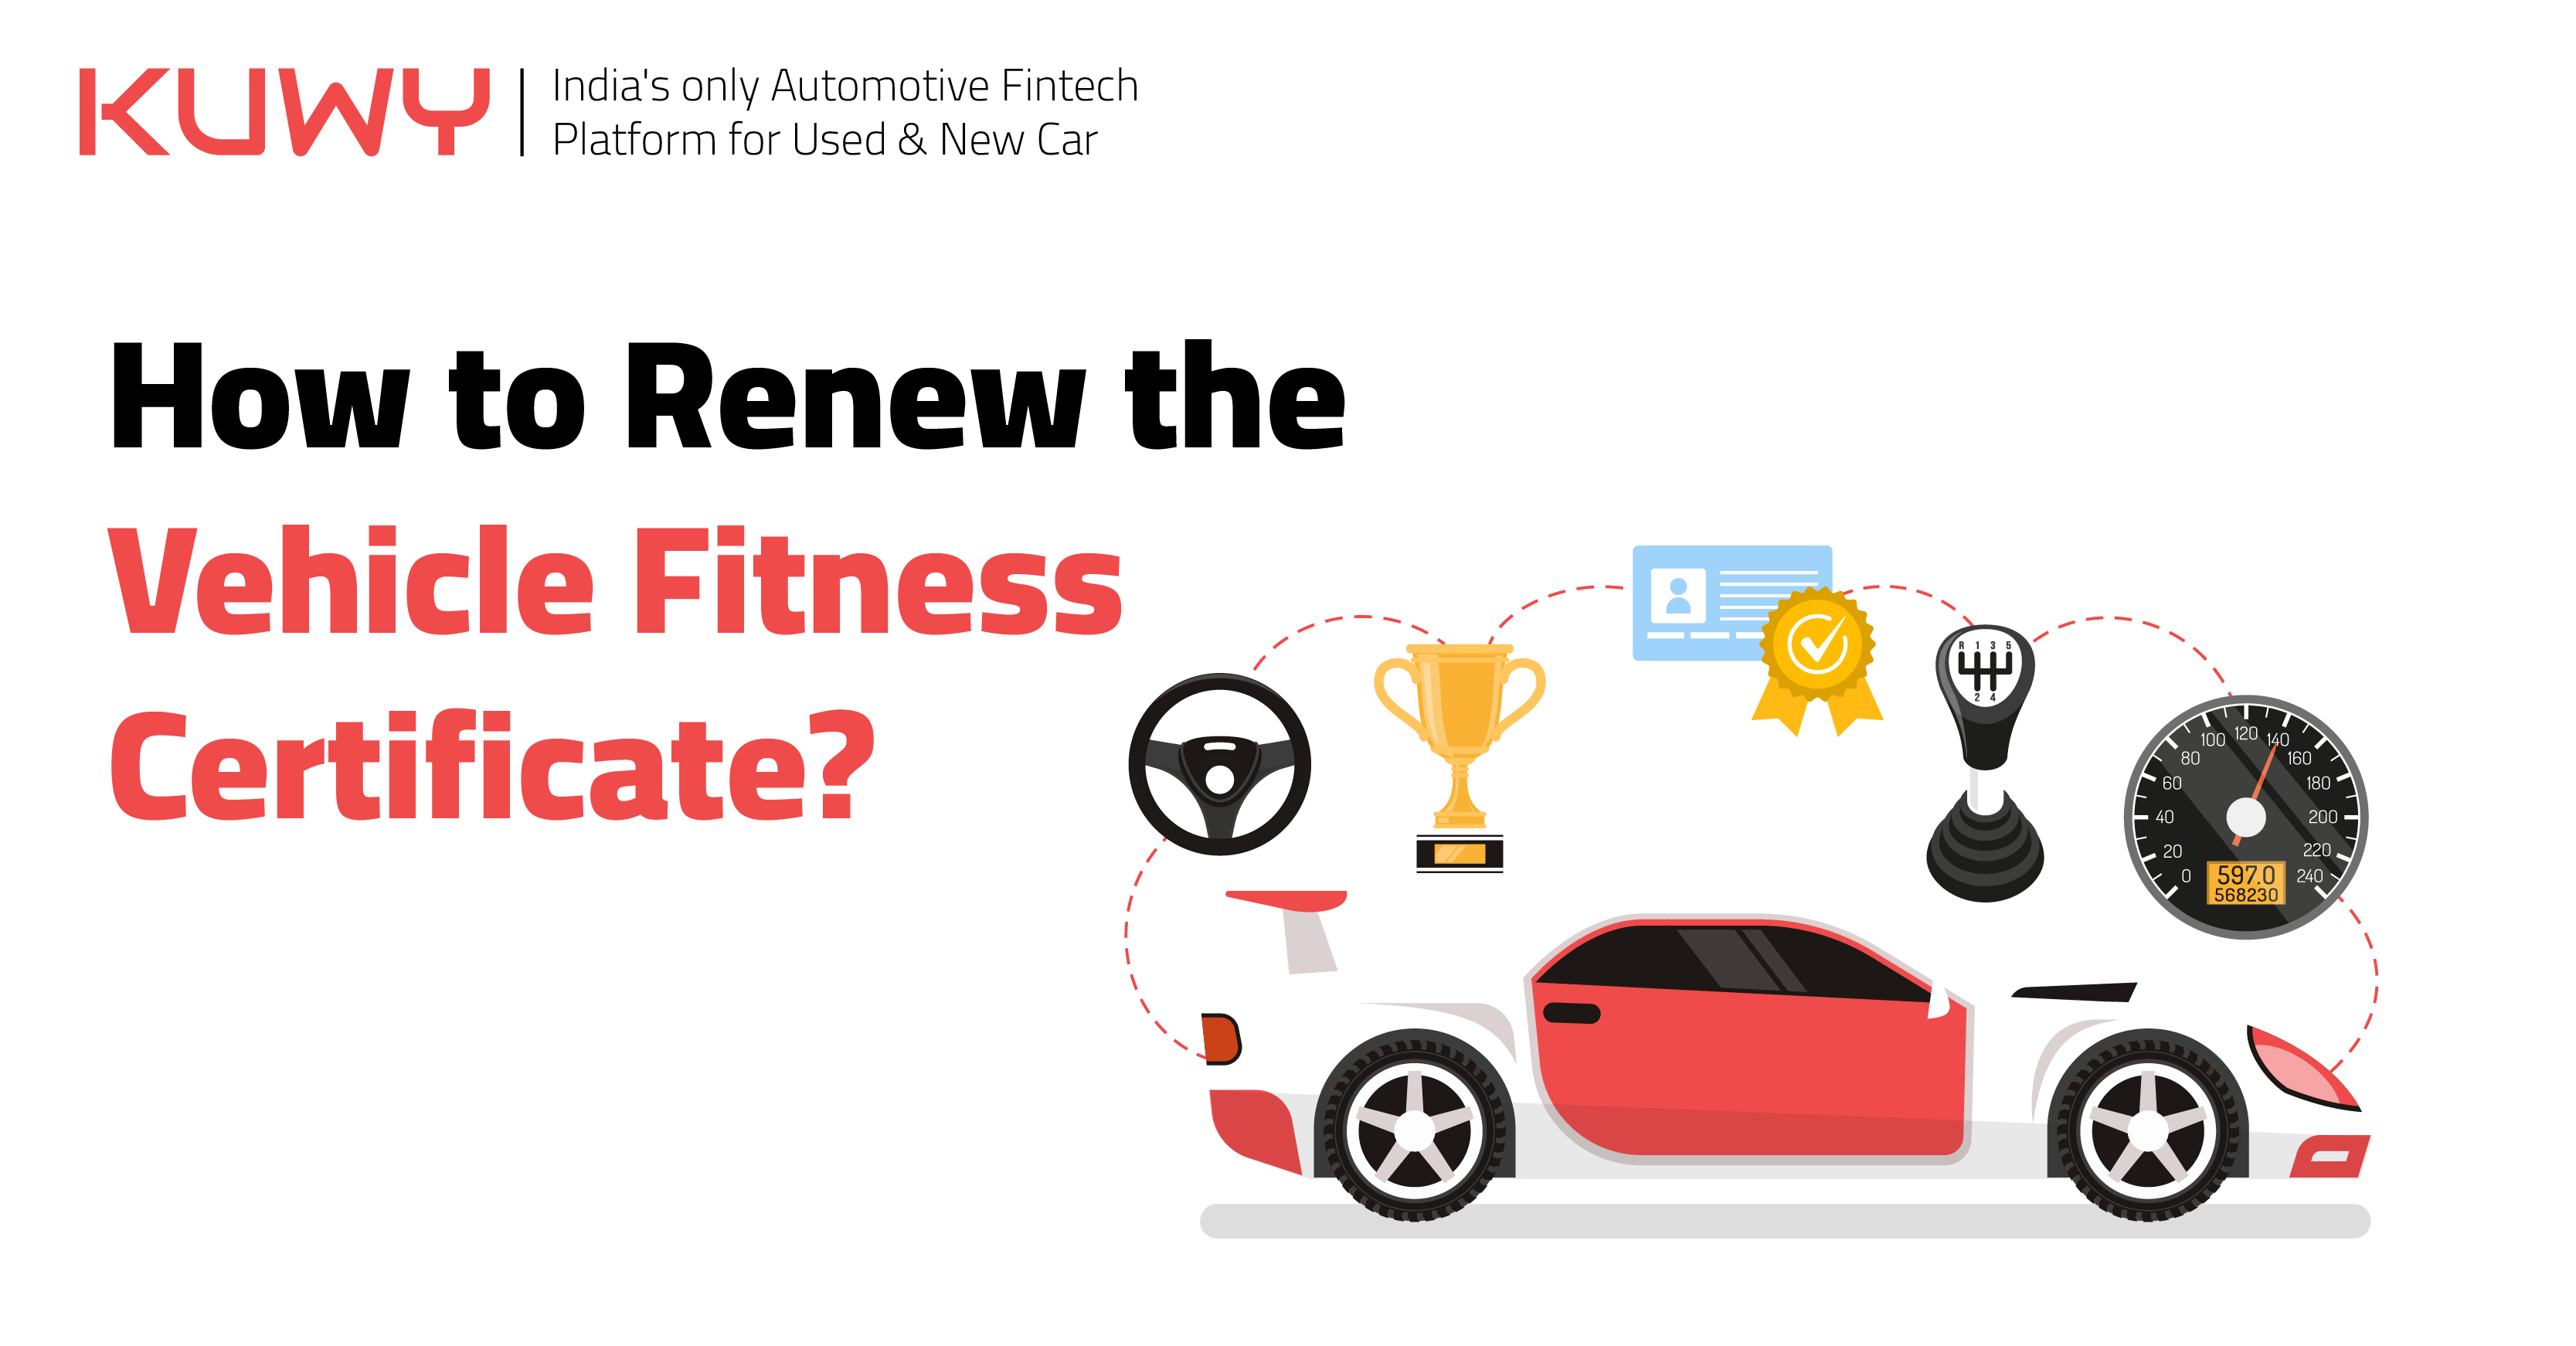 All about Vehicle Fitness Renewal in the Automotive Industry